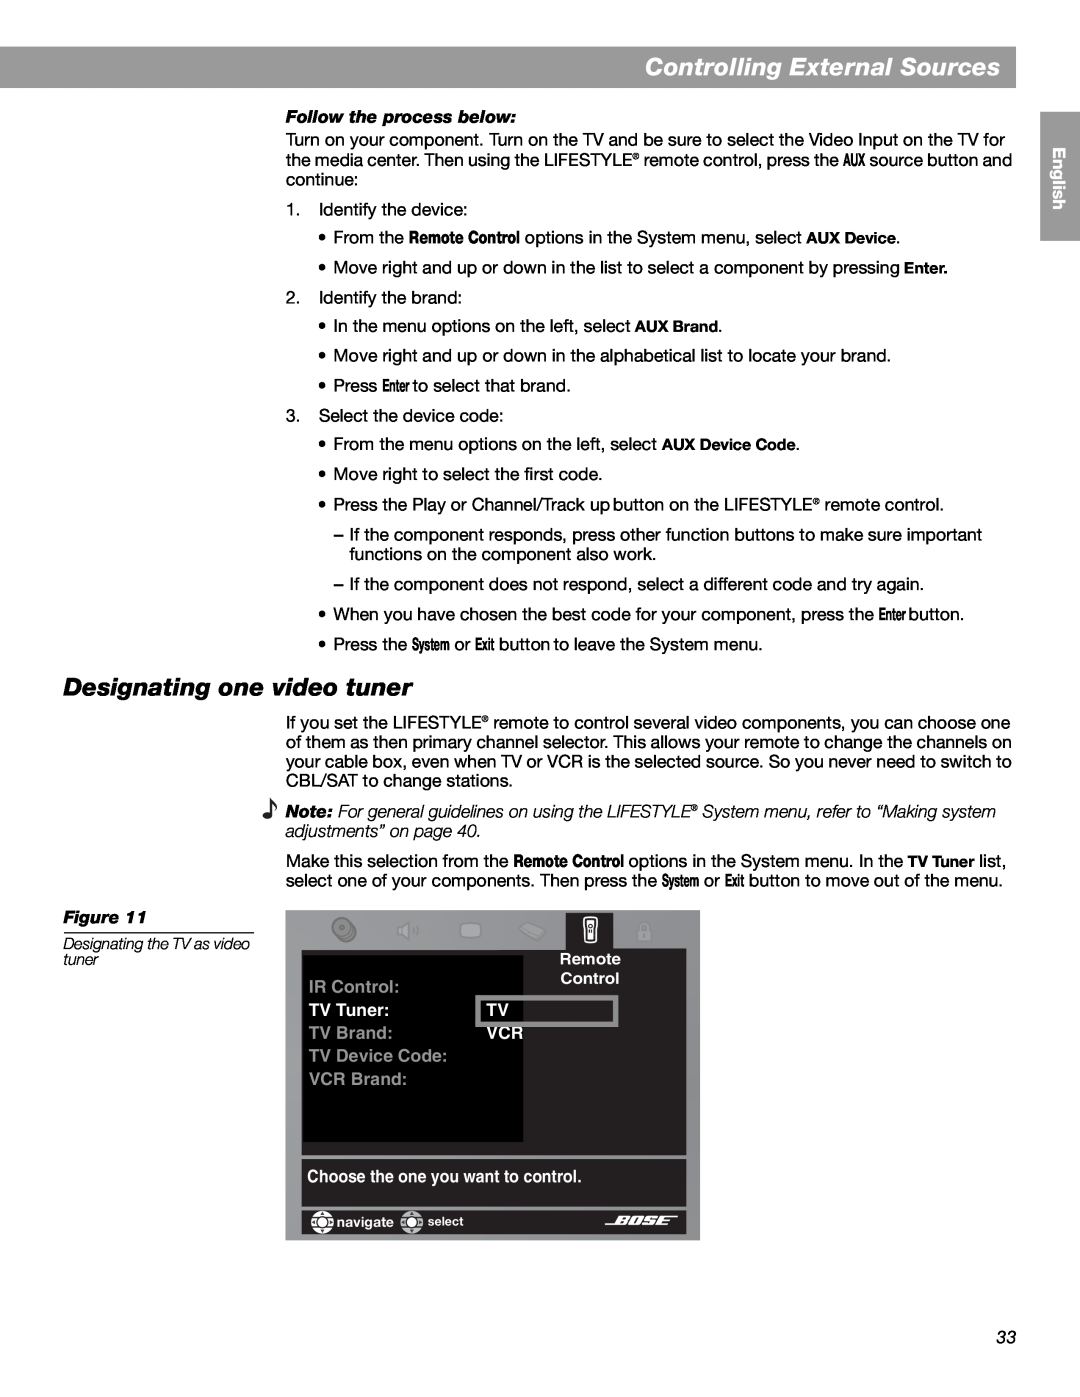 Bose LIFESTYLE 38 Designating one video tuner, Controlling External Sources, Follow the process below, Figure, IR Control 